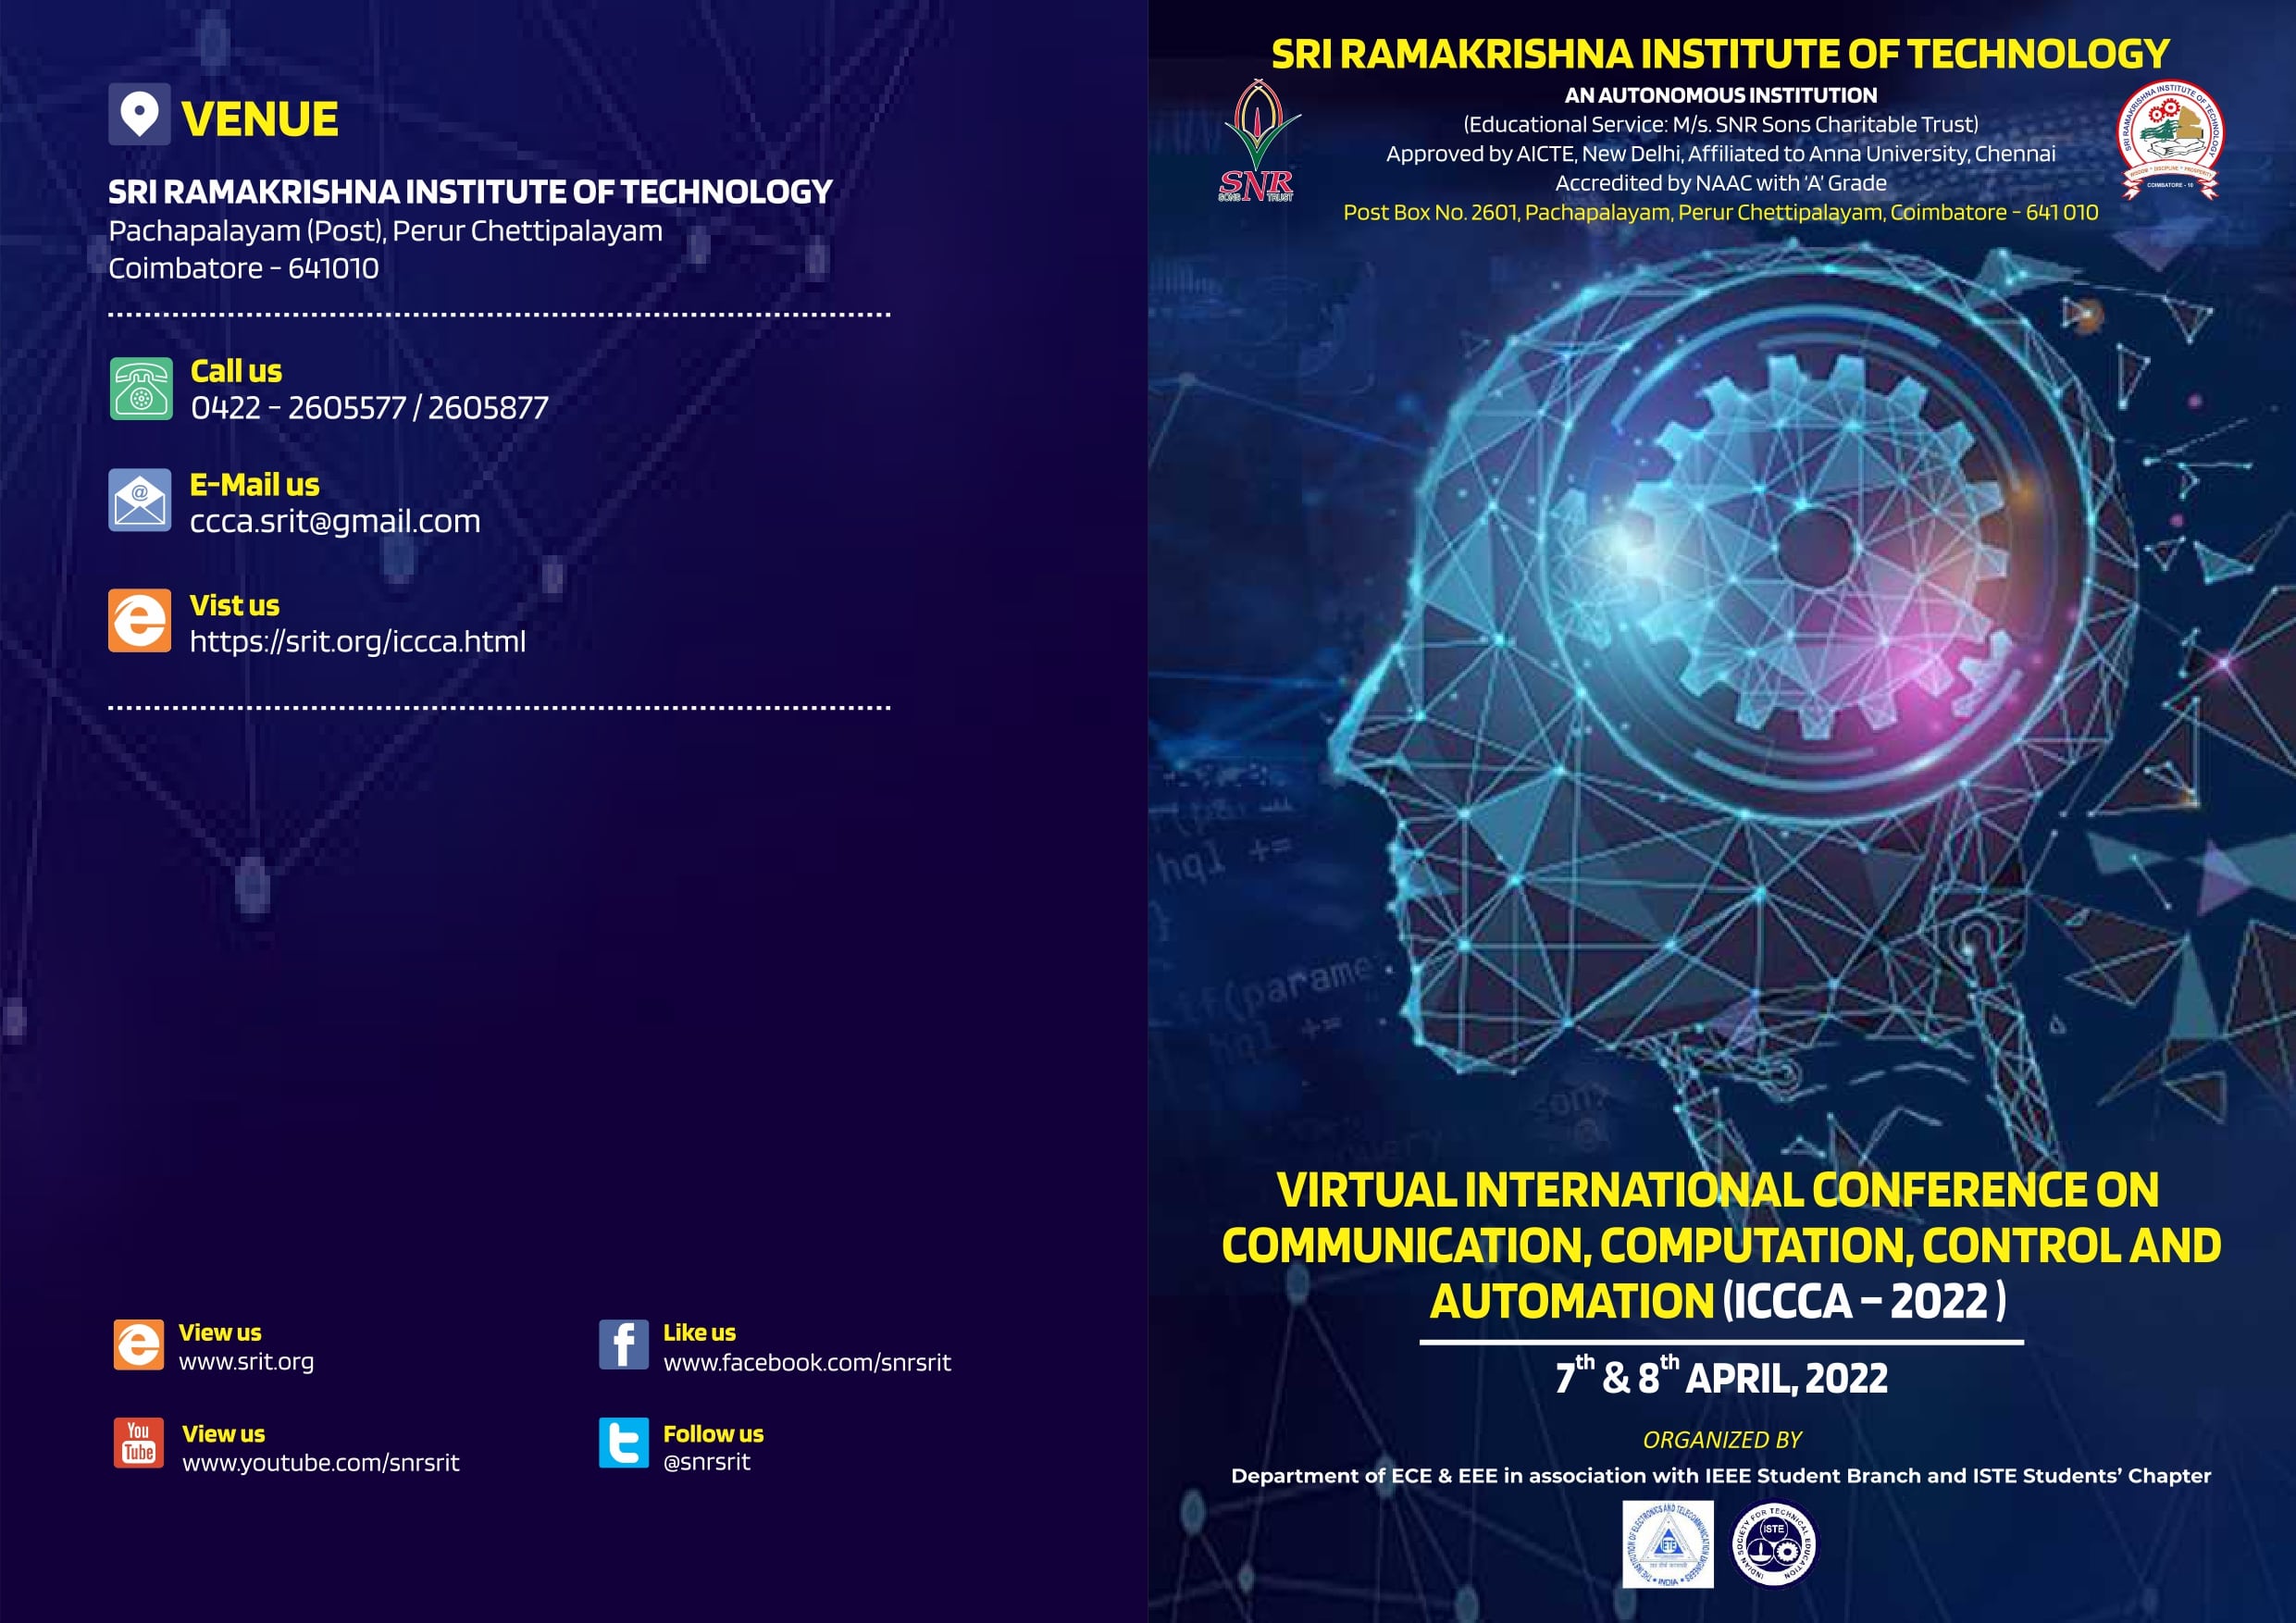 International Conference on Communication, Computation, Control and Automation ICCCA 2022